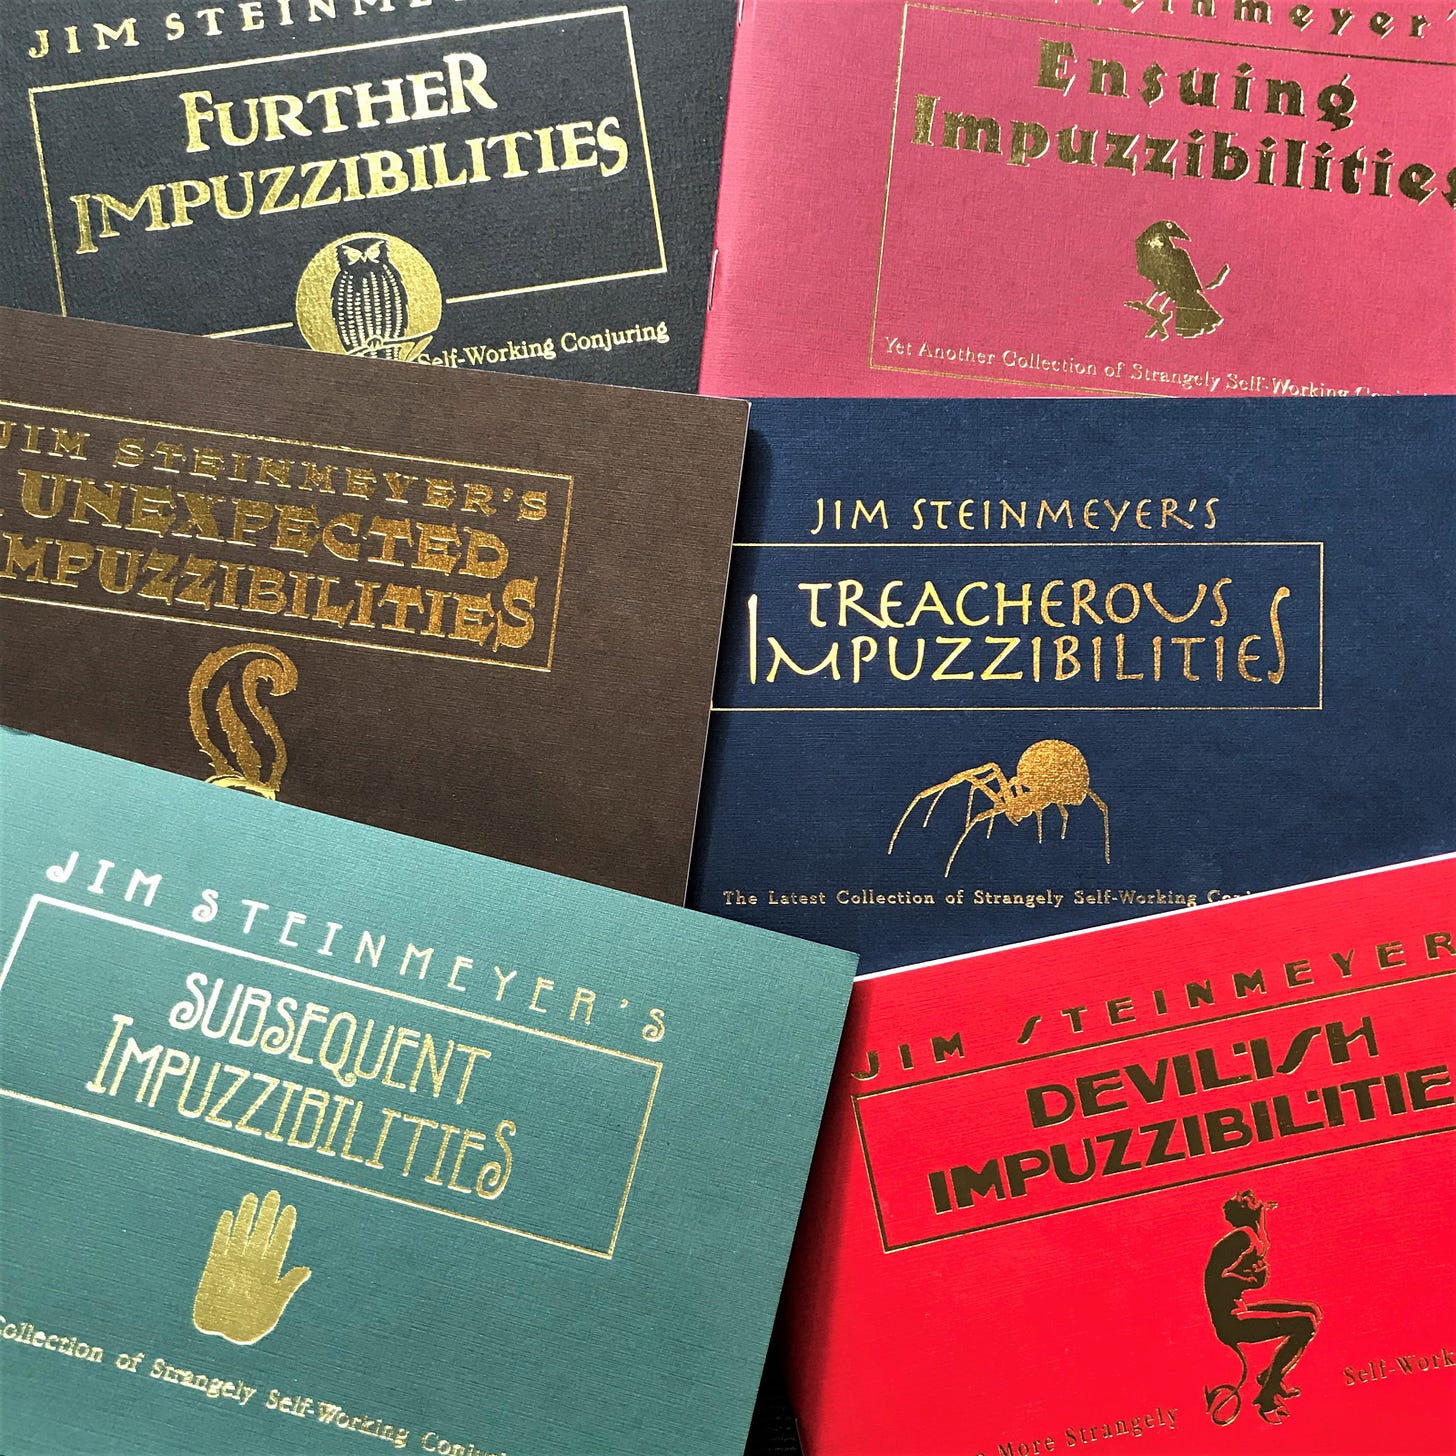 Six colourful books from the Impuzzibilities series by Jim Steinmeyer.